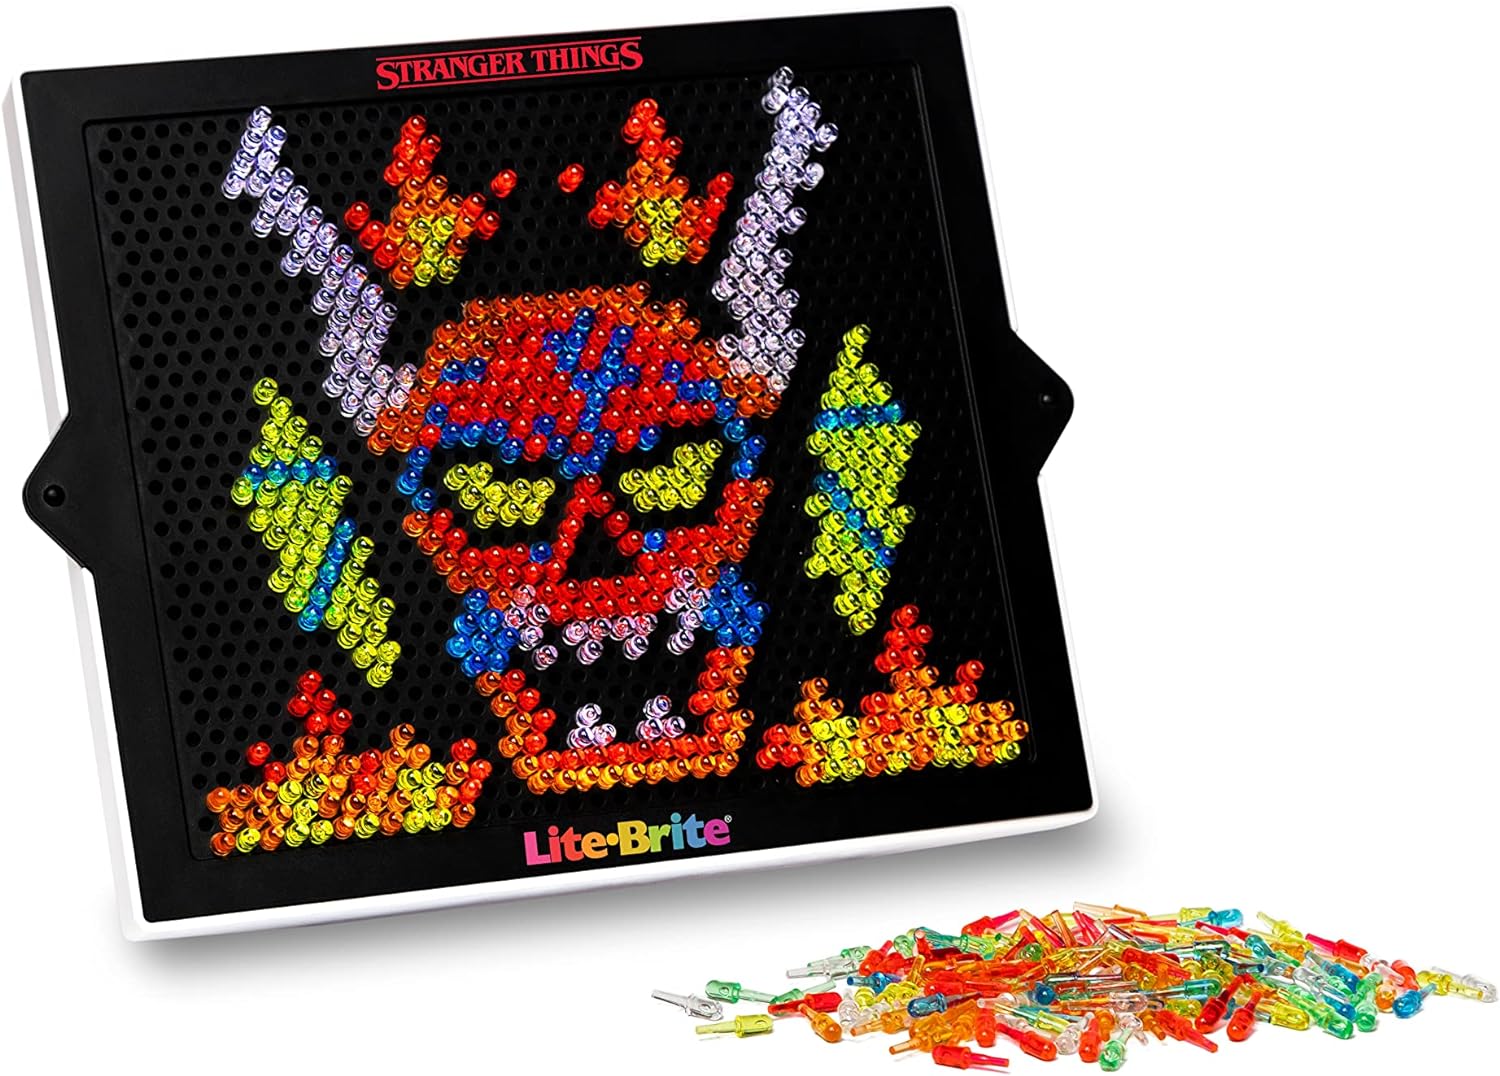 Lite-Brite Stranger Things Special Edition - Demogorgon Hunters - Amazon Exclusive - High-Definition Grid, 16 HD Templates, 900 Mini Pegs, Stickers, Branded Storage Pouch, Ages 14+